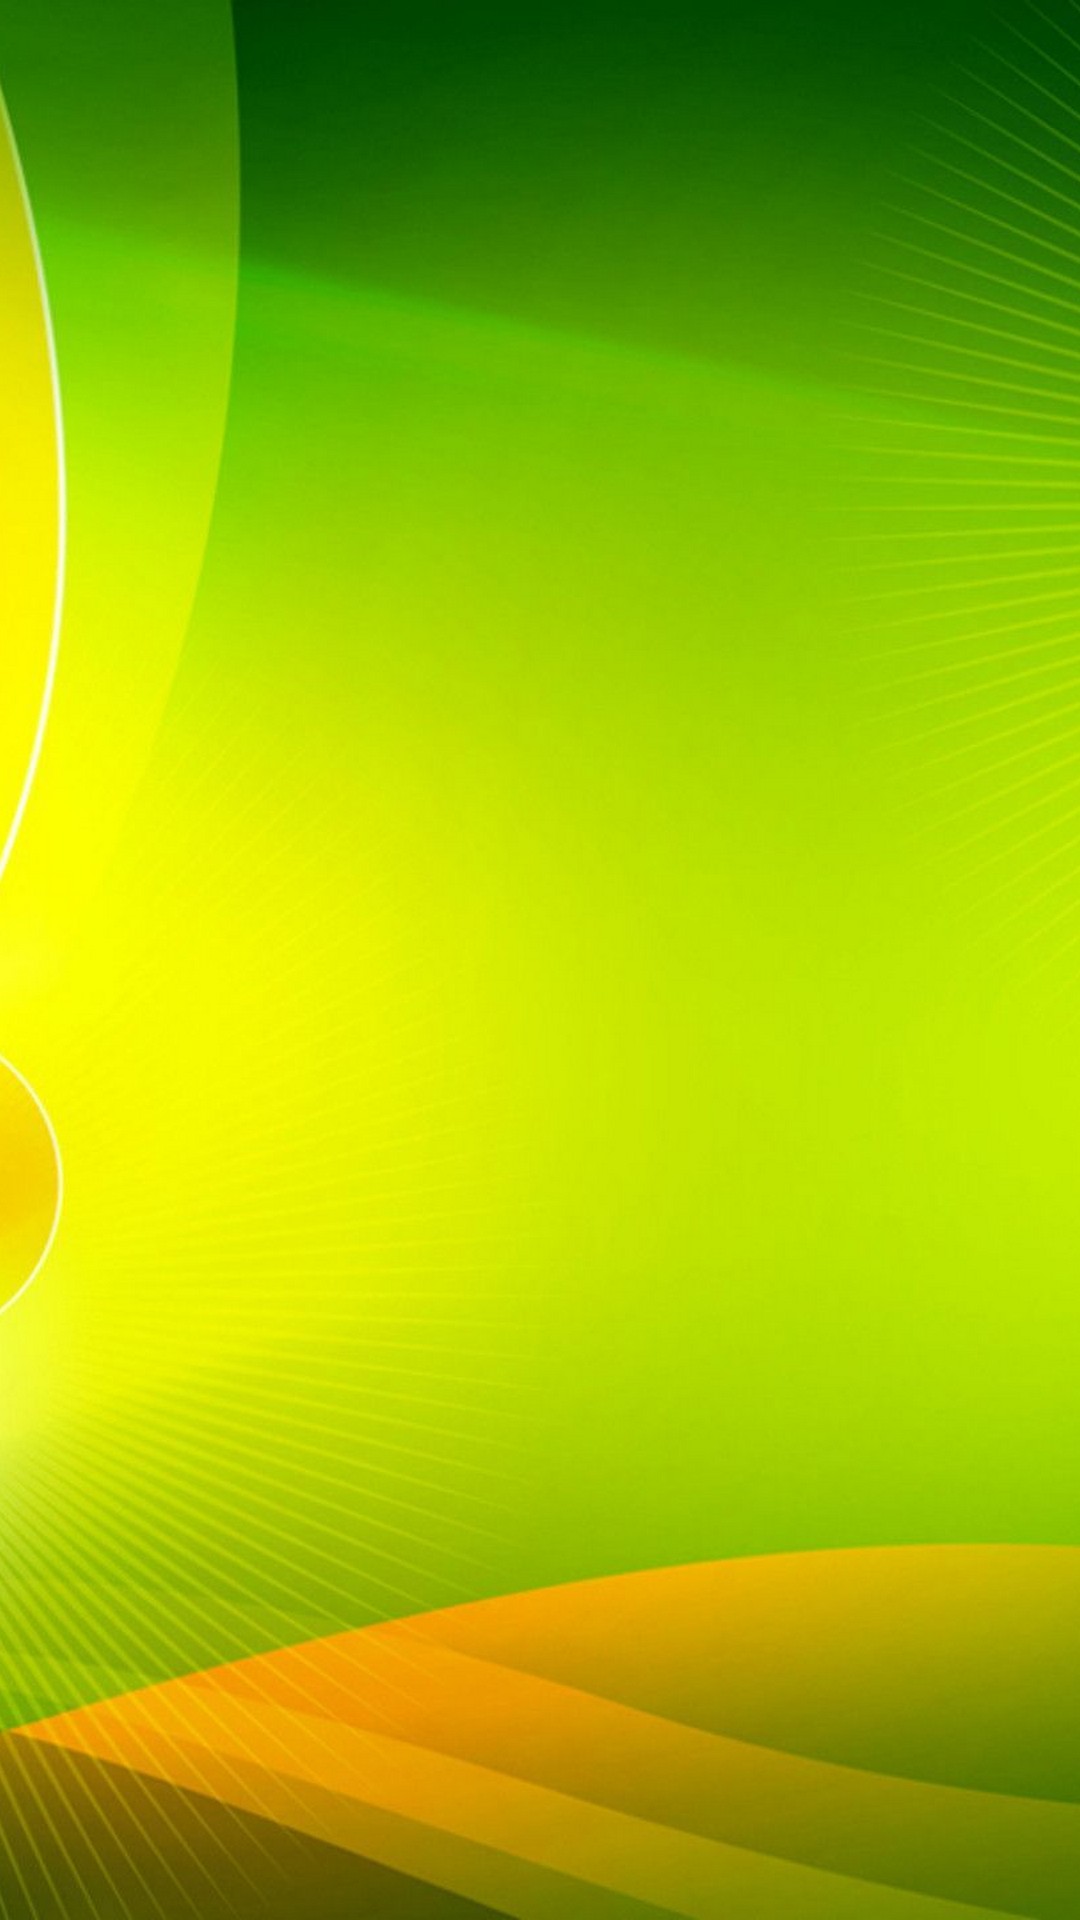 Lime Green Backgrounds For Android with resolution 1080X1920 pixel. You can make this wallpaper for your Android backgrounds, Tablet, Smartphones Screensavers and Mobile Phone Lock Screen